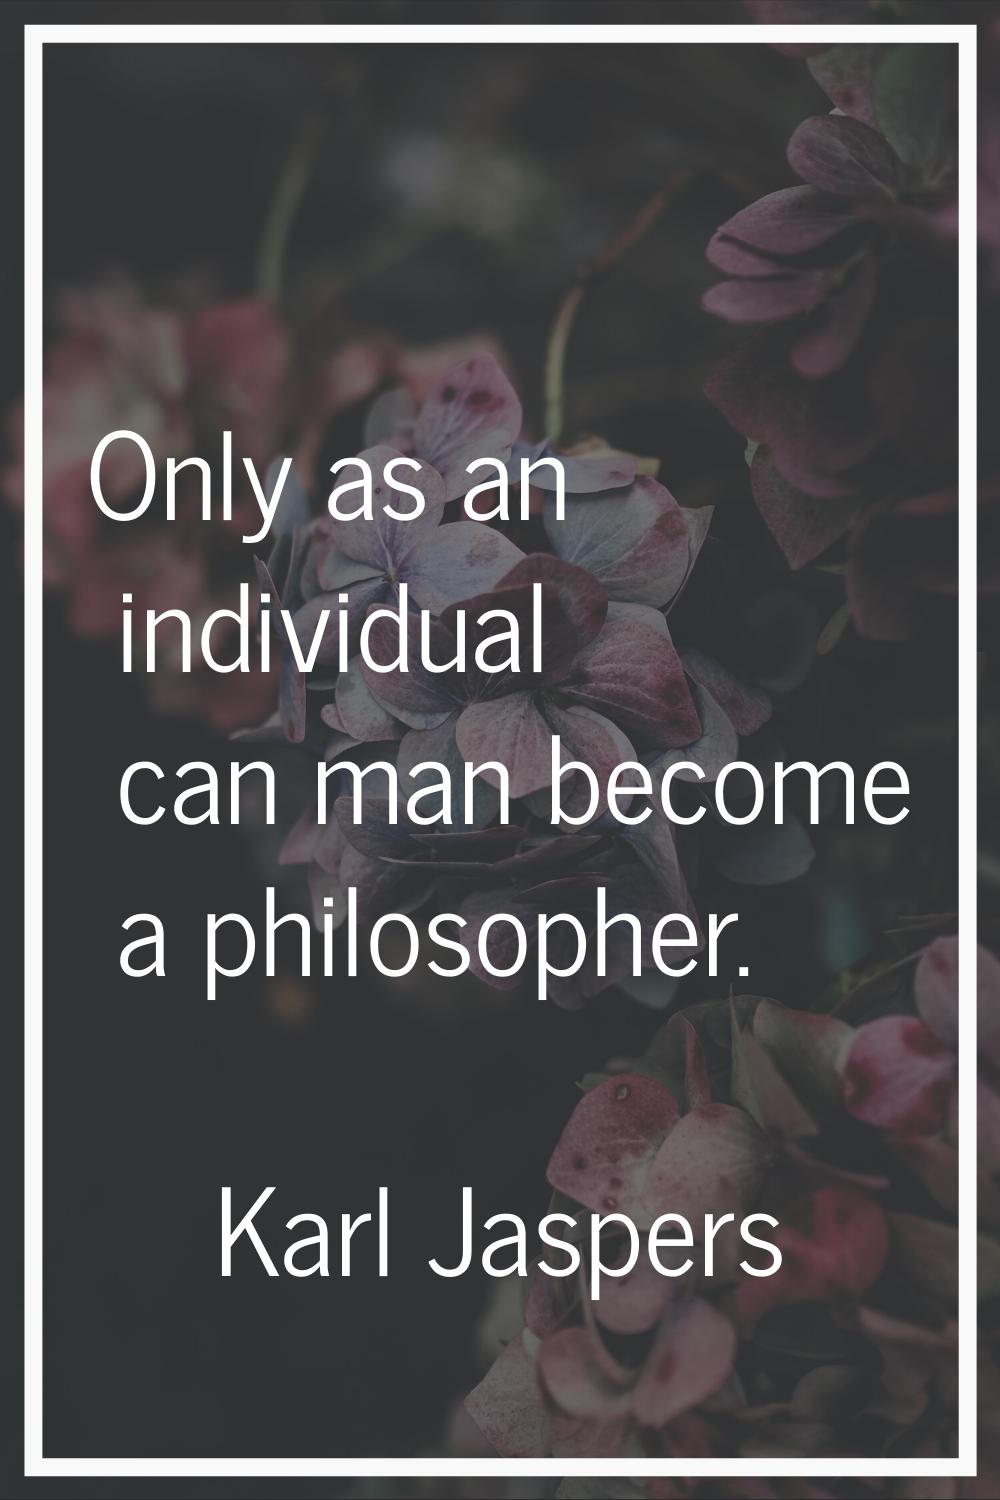 Only as an individual can man become a philosopher.